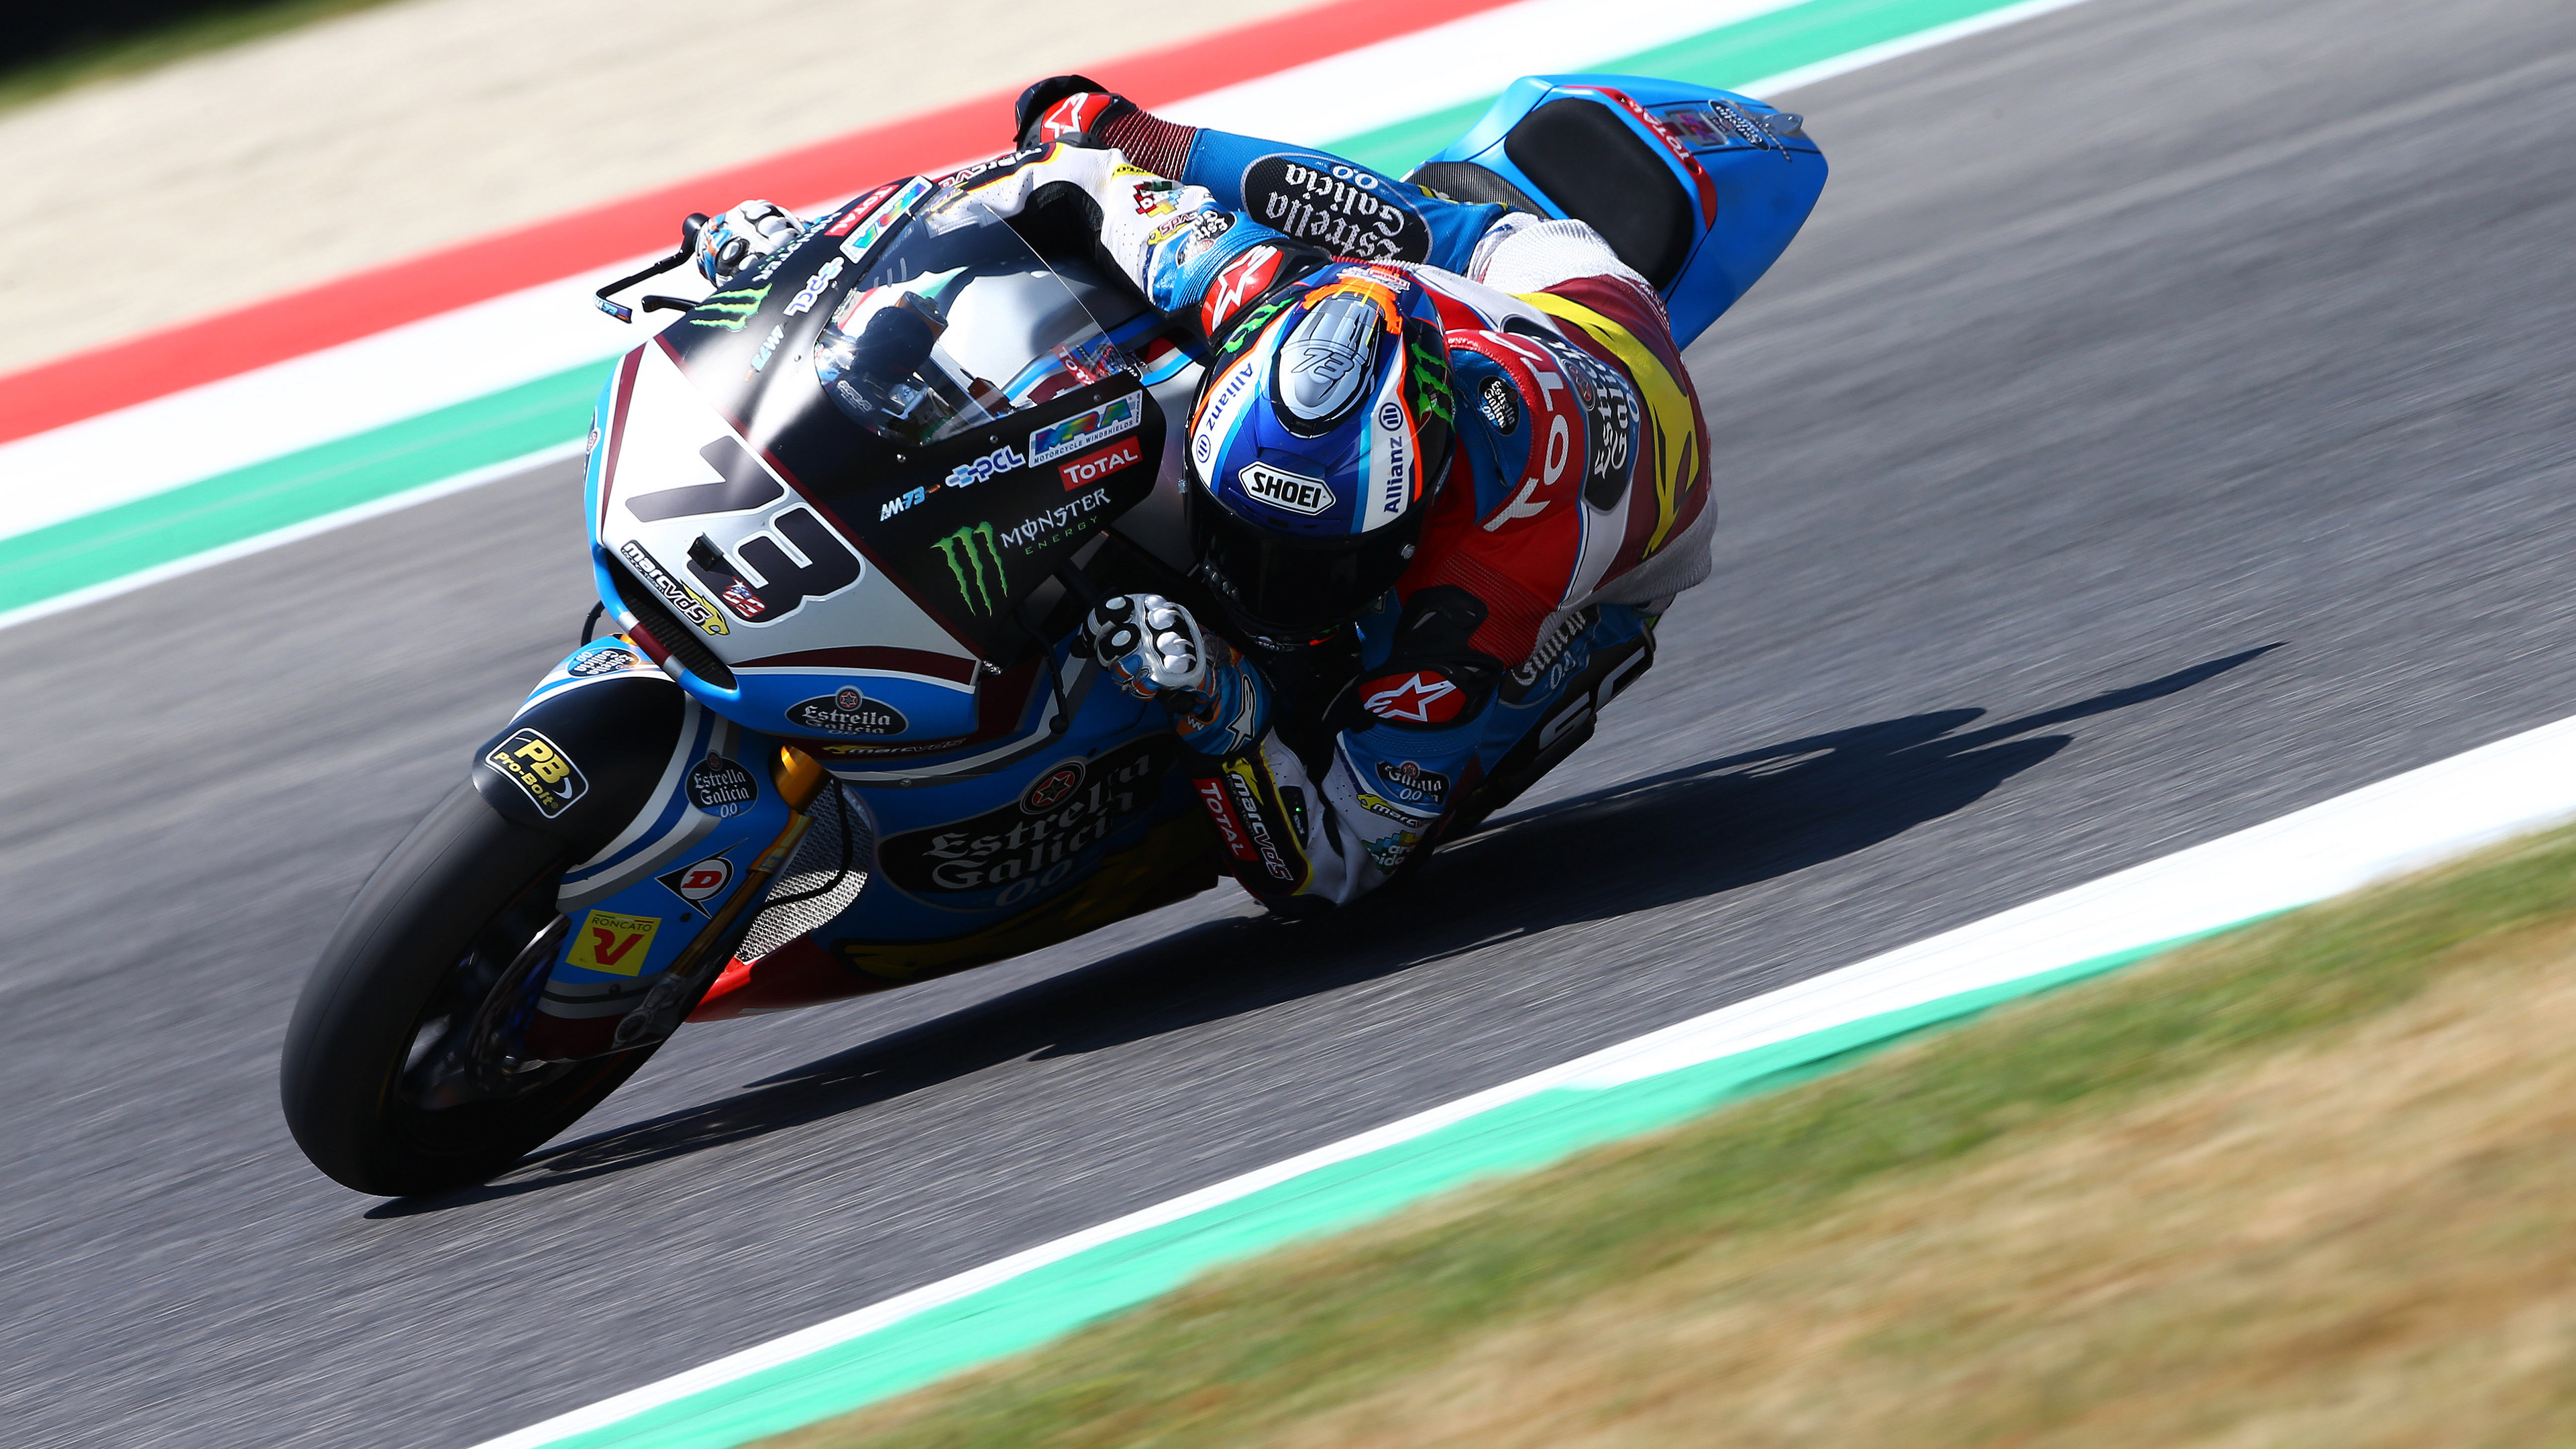 Motorcycle Racing: Alex Marquez, Motorcycle Racer, Moto3 World Championship, Marc VDS Racing Team, Founded by Marc-Oswald van der Straten-Ponthoz. 3840x2160 4K Wallpaper.